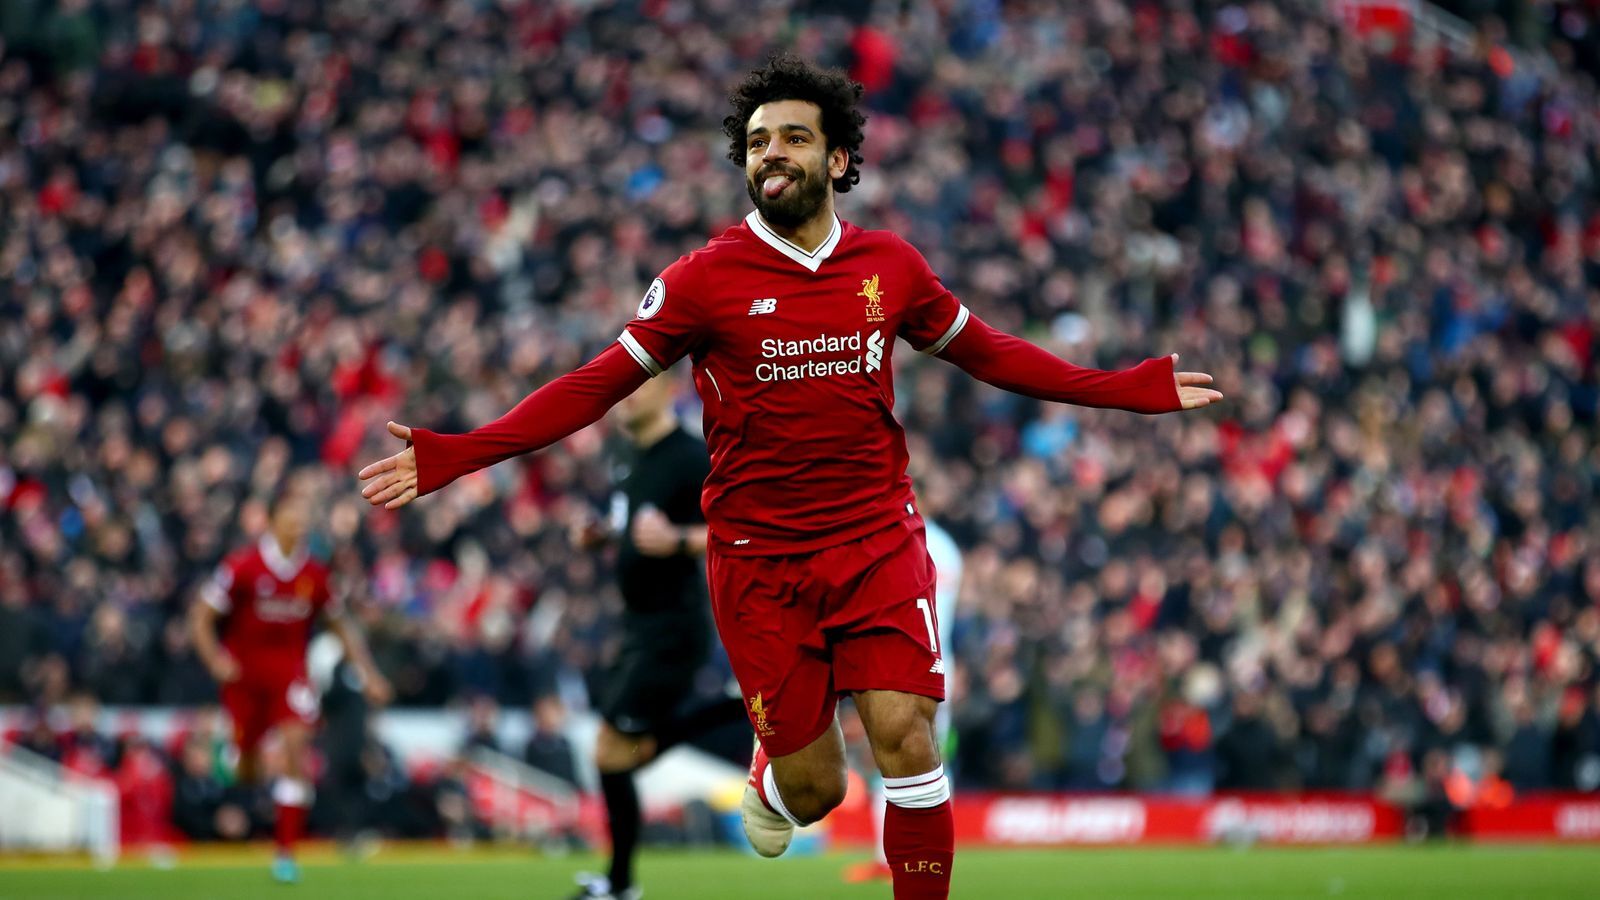 Liverpool star Salah made a touching gesture for fans